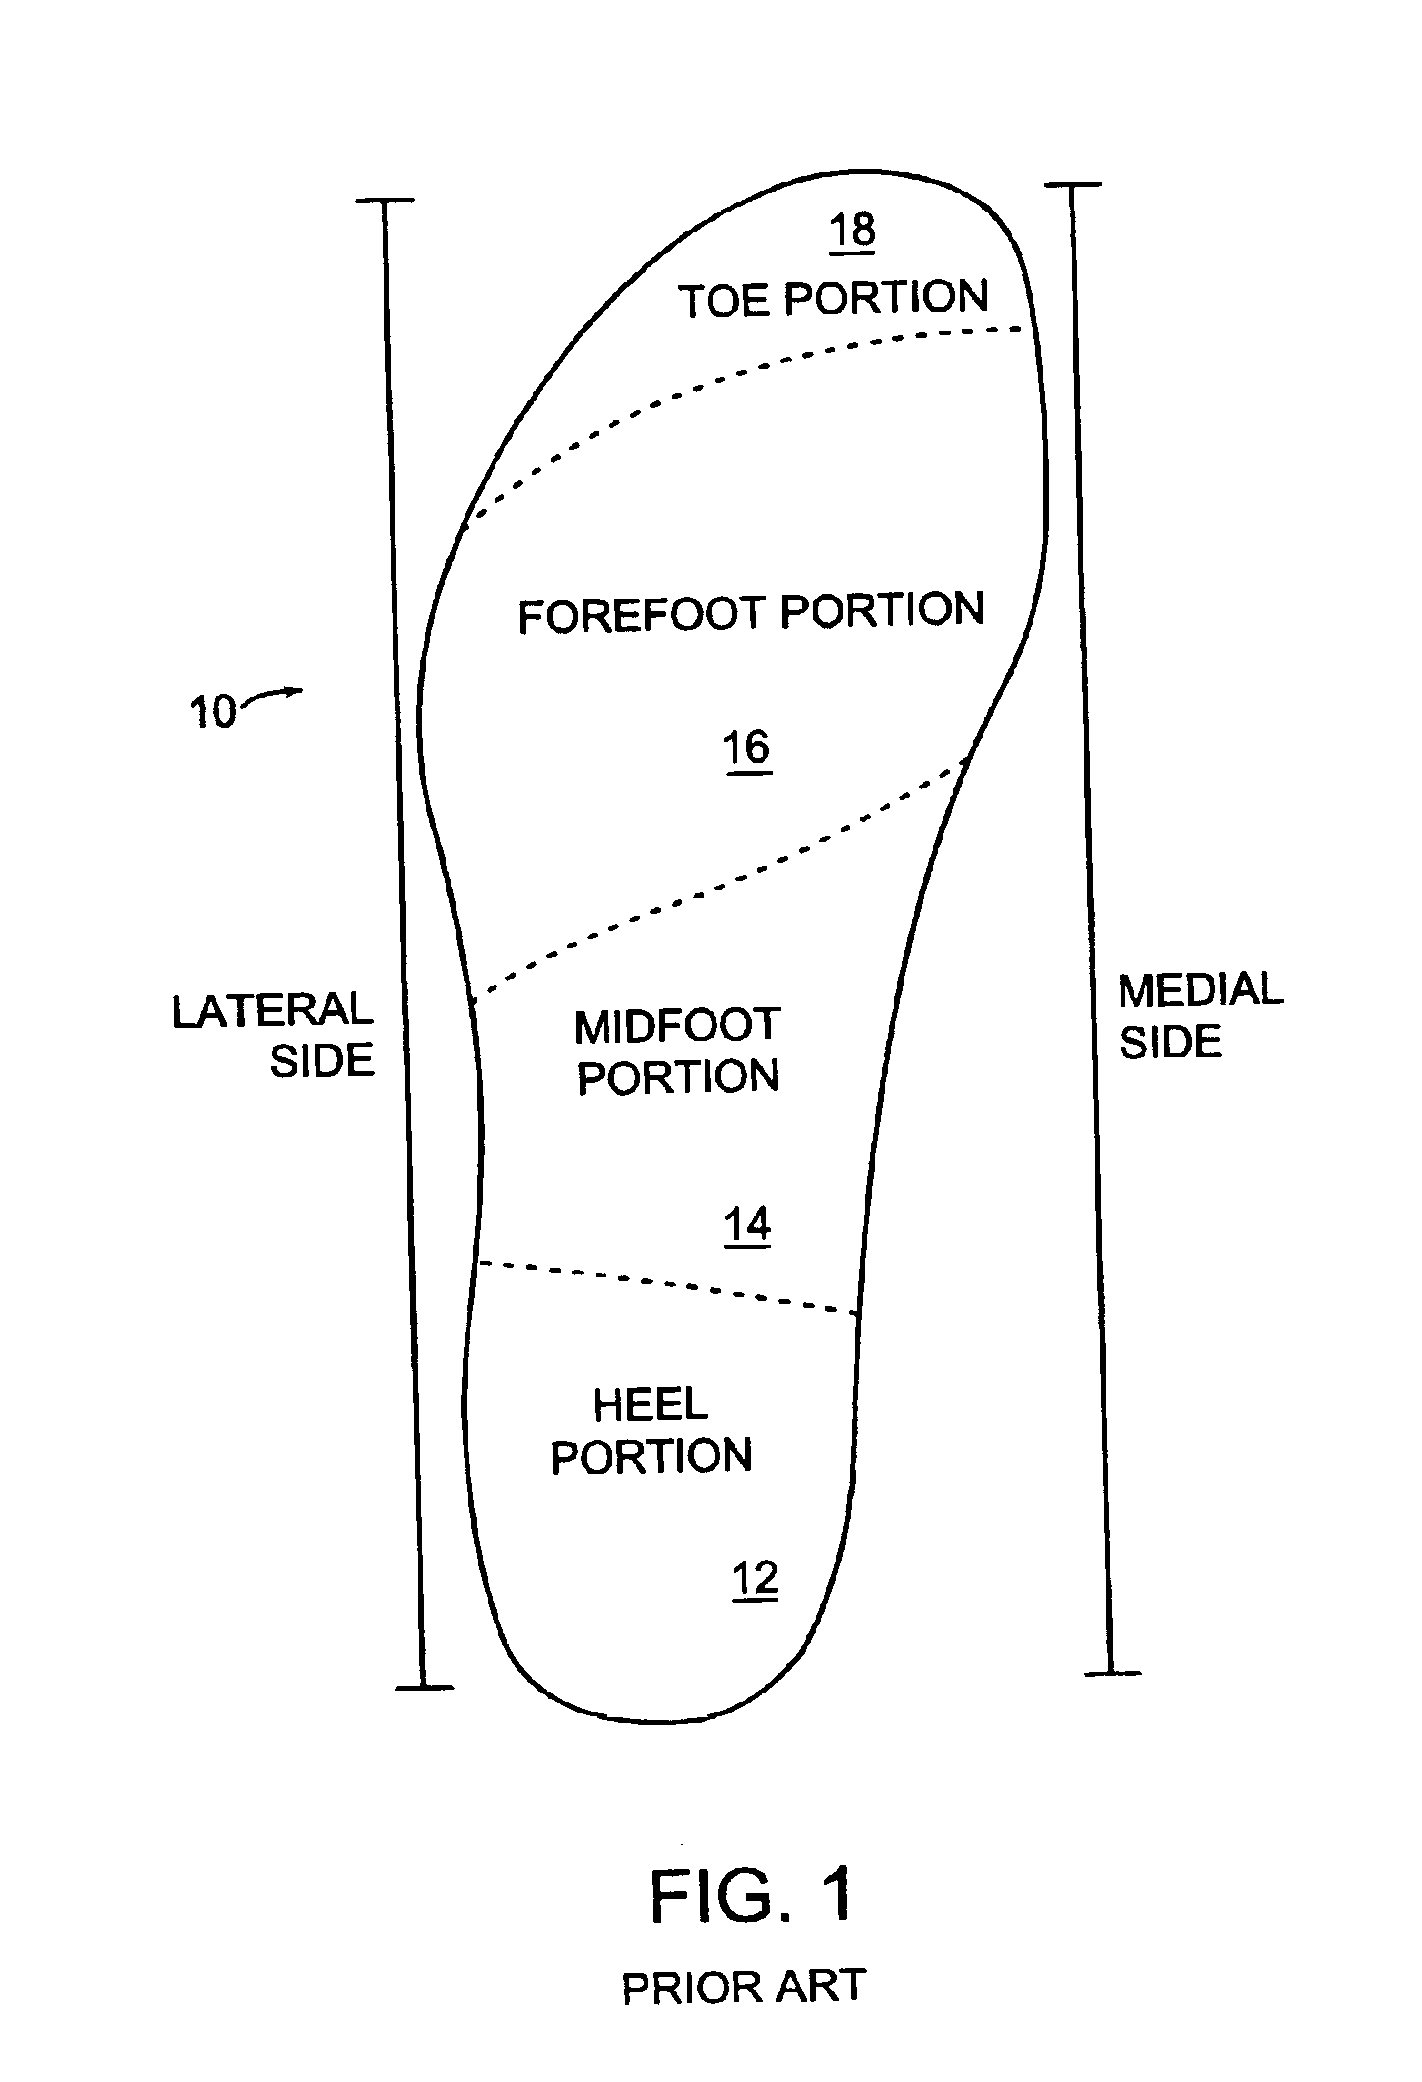 Cantilevered shoe construction